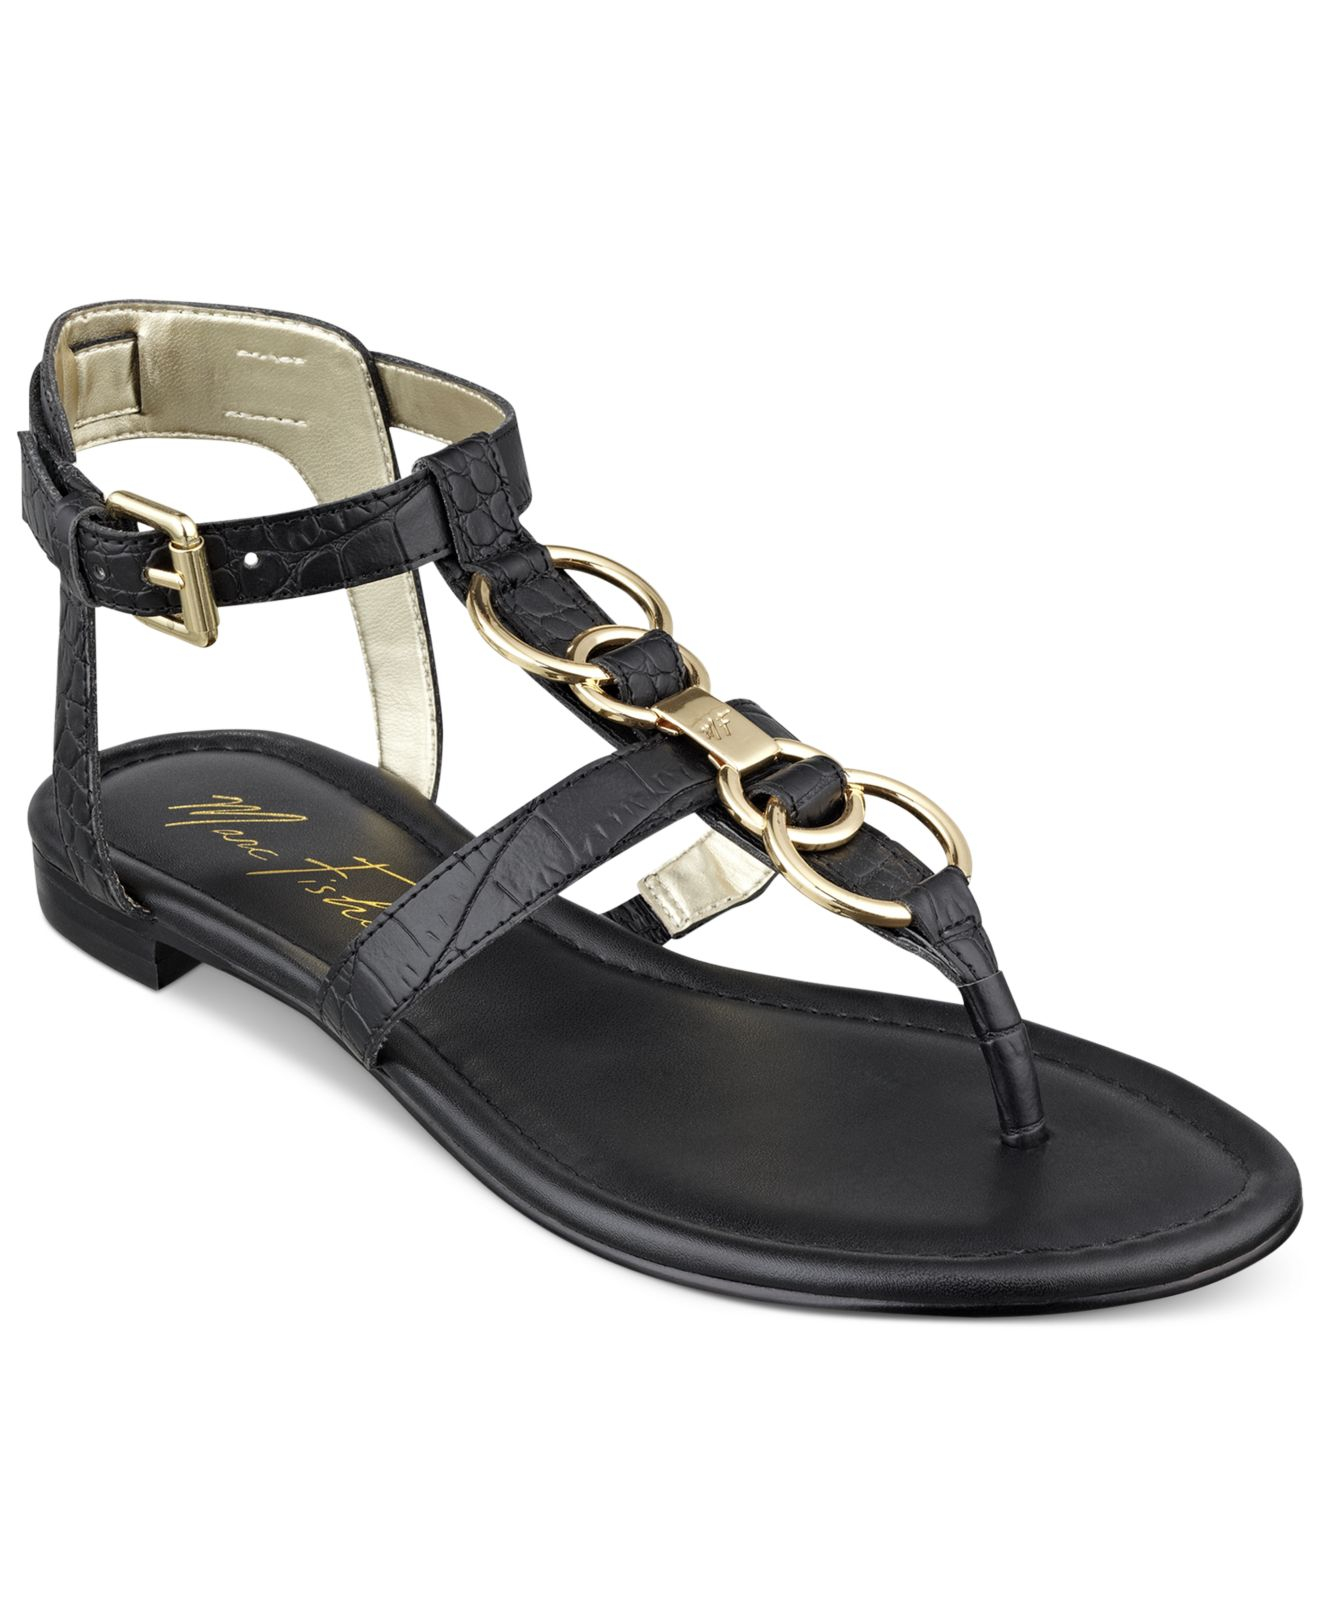 Lyst - Marc Fisher Palyna T-Strap Thong Sandals in Black